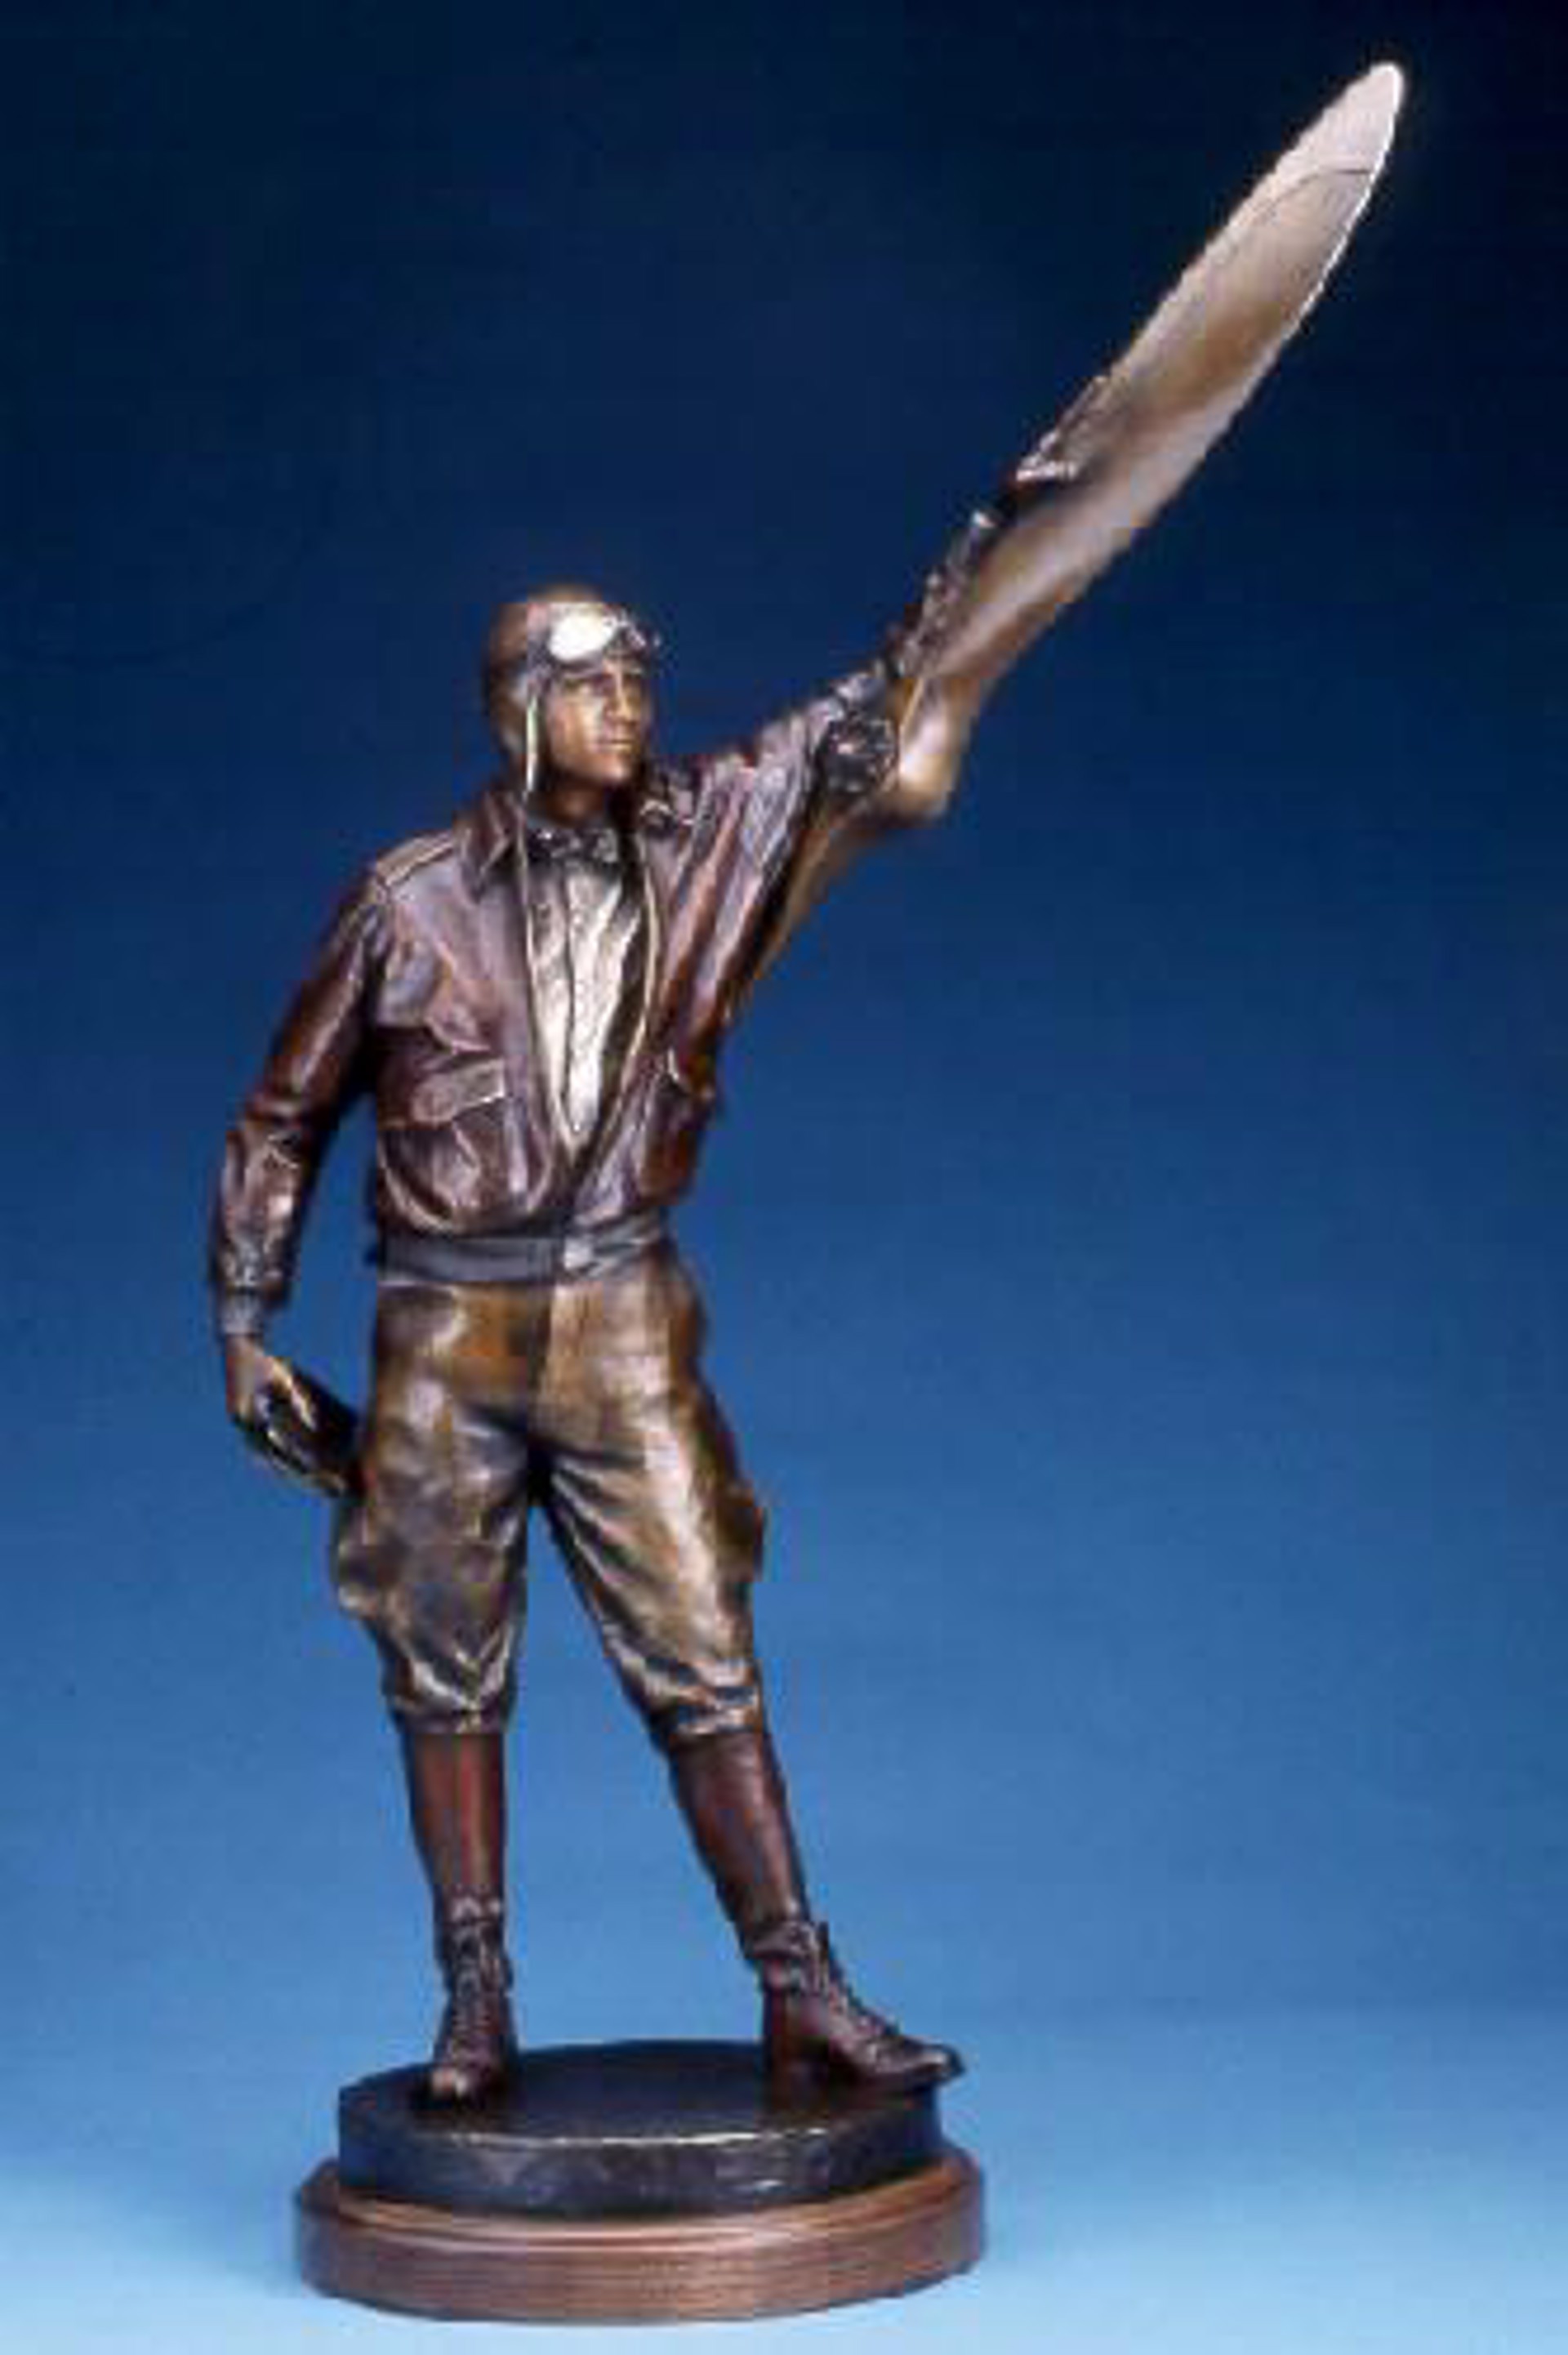 Aviator by George Lundeen